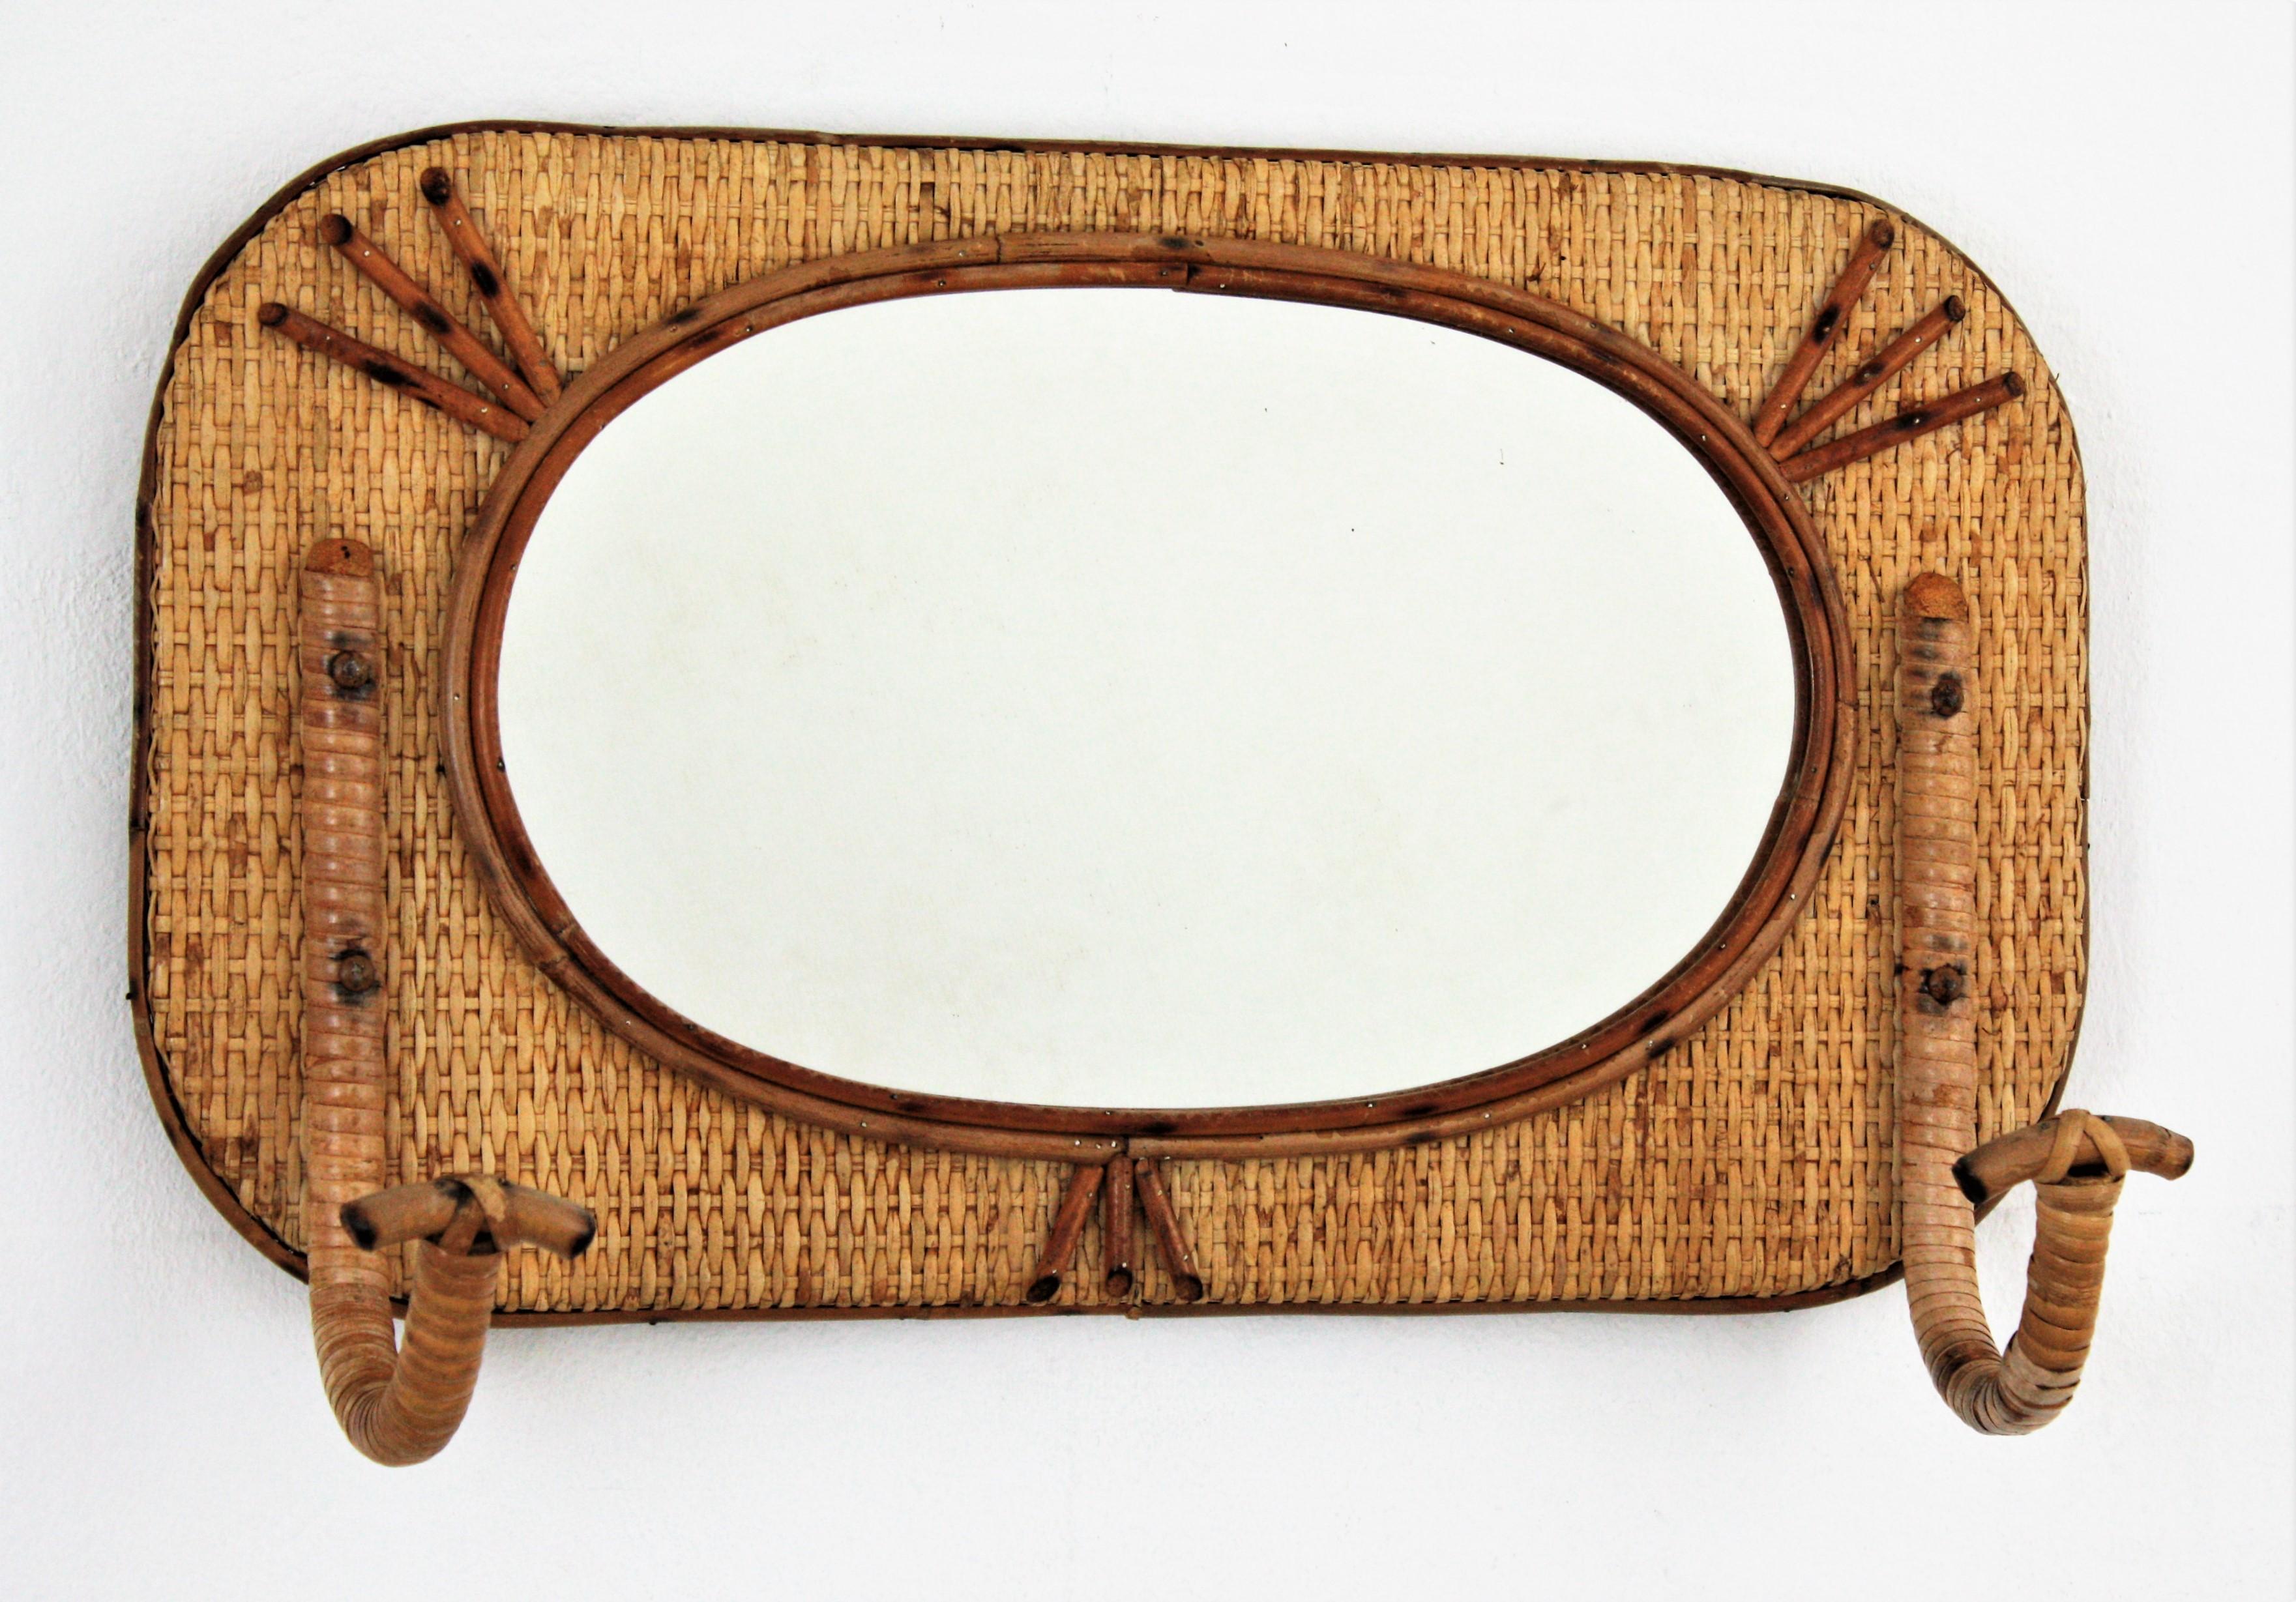 Mid-Century Modern Bamboo and Rattan Wall Coat Hanger Rack with Mirror, Spain, 1960s